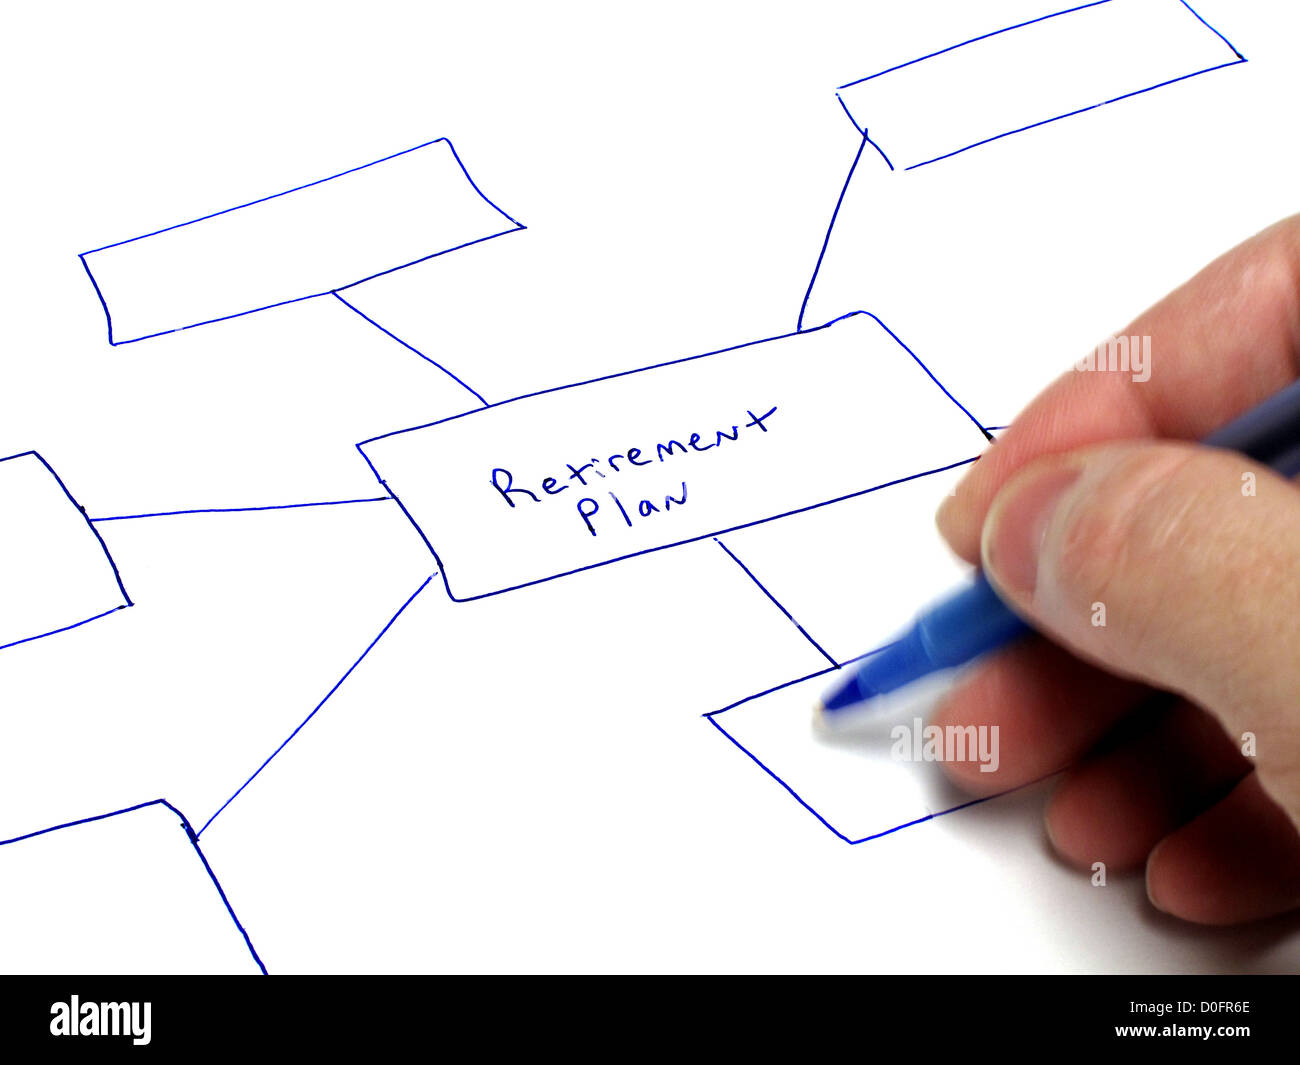 Hand writing a diagram on a paper for business planning Stock Photo